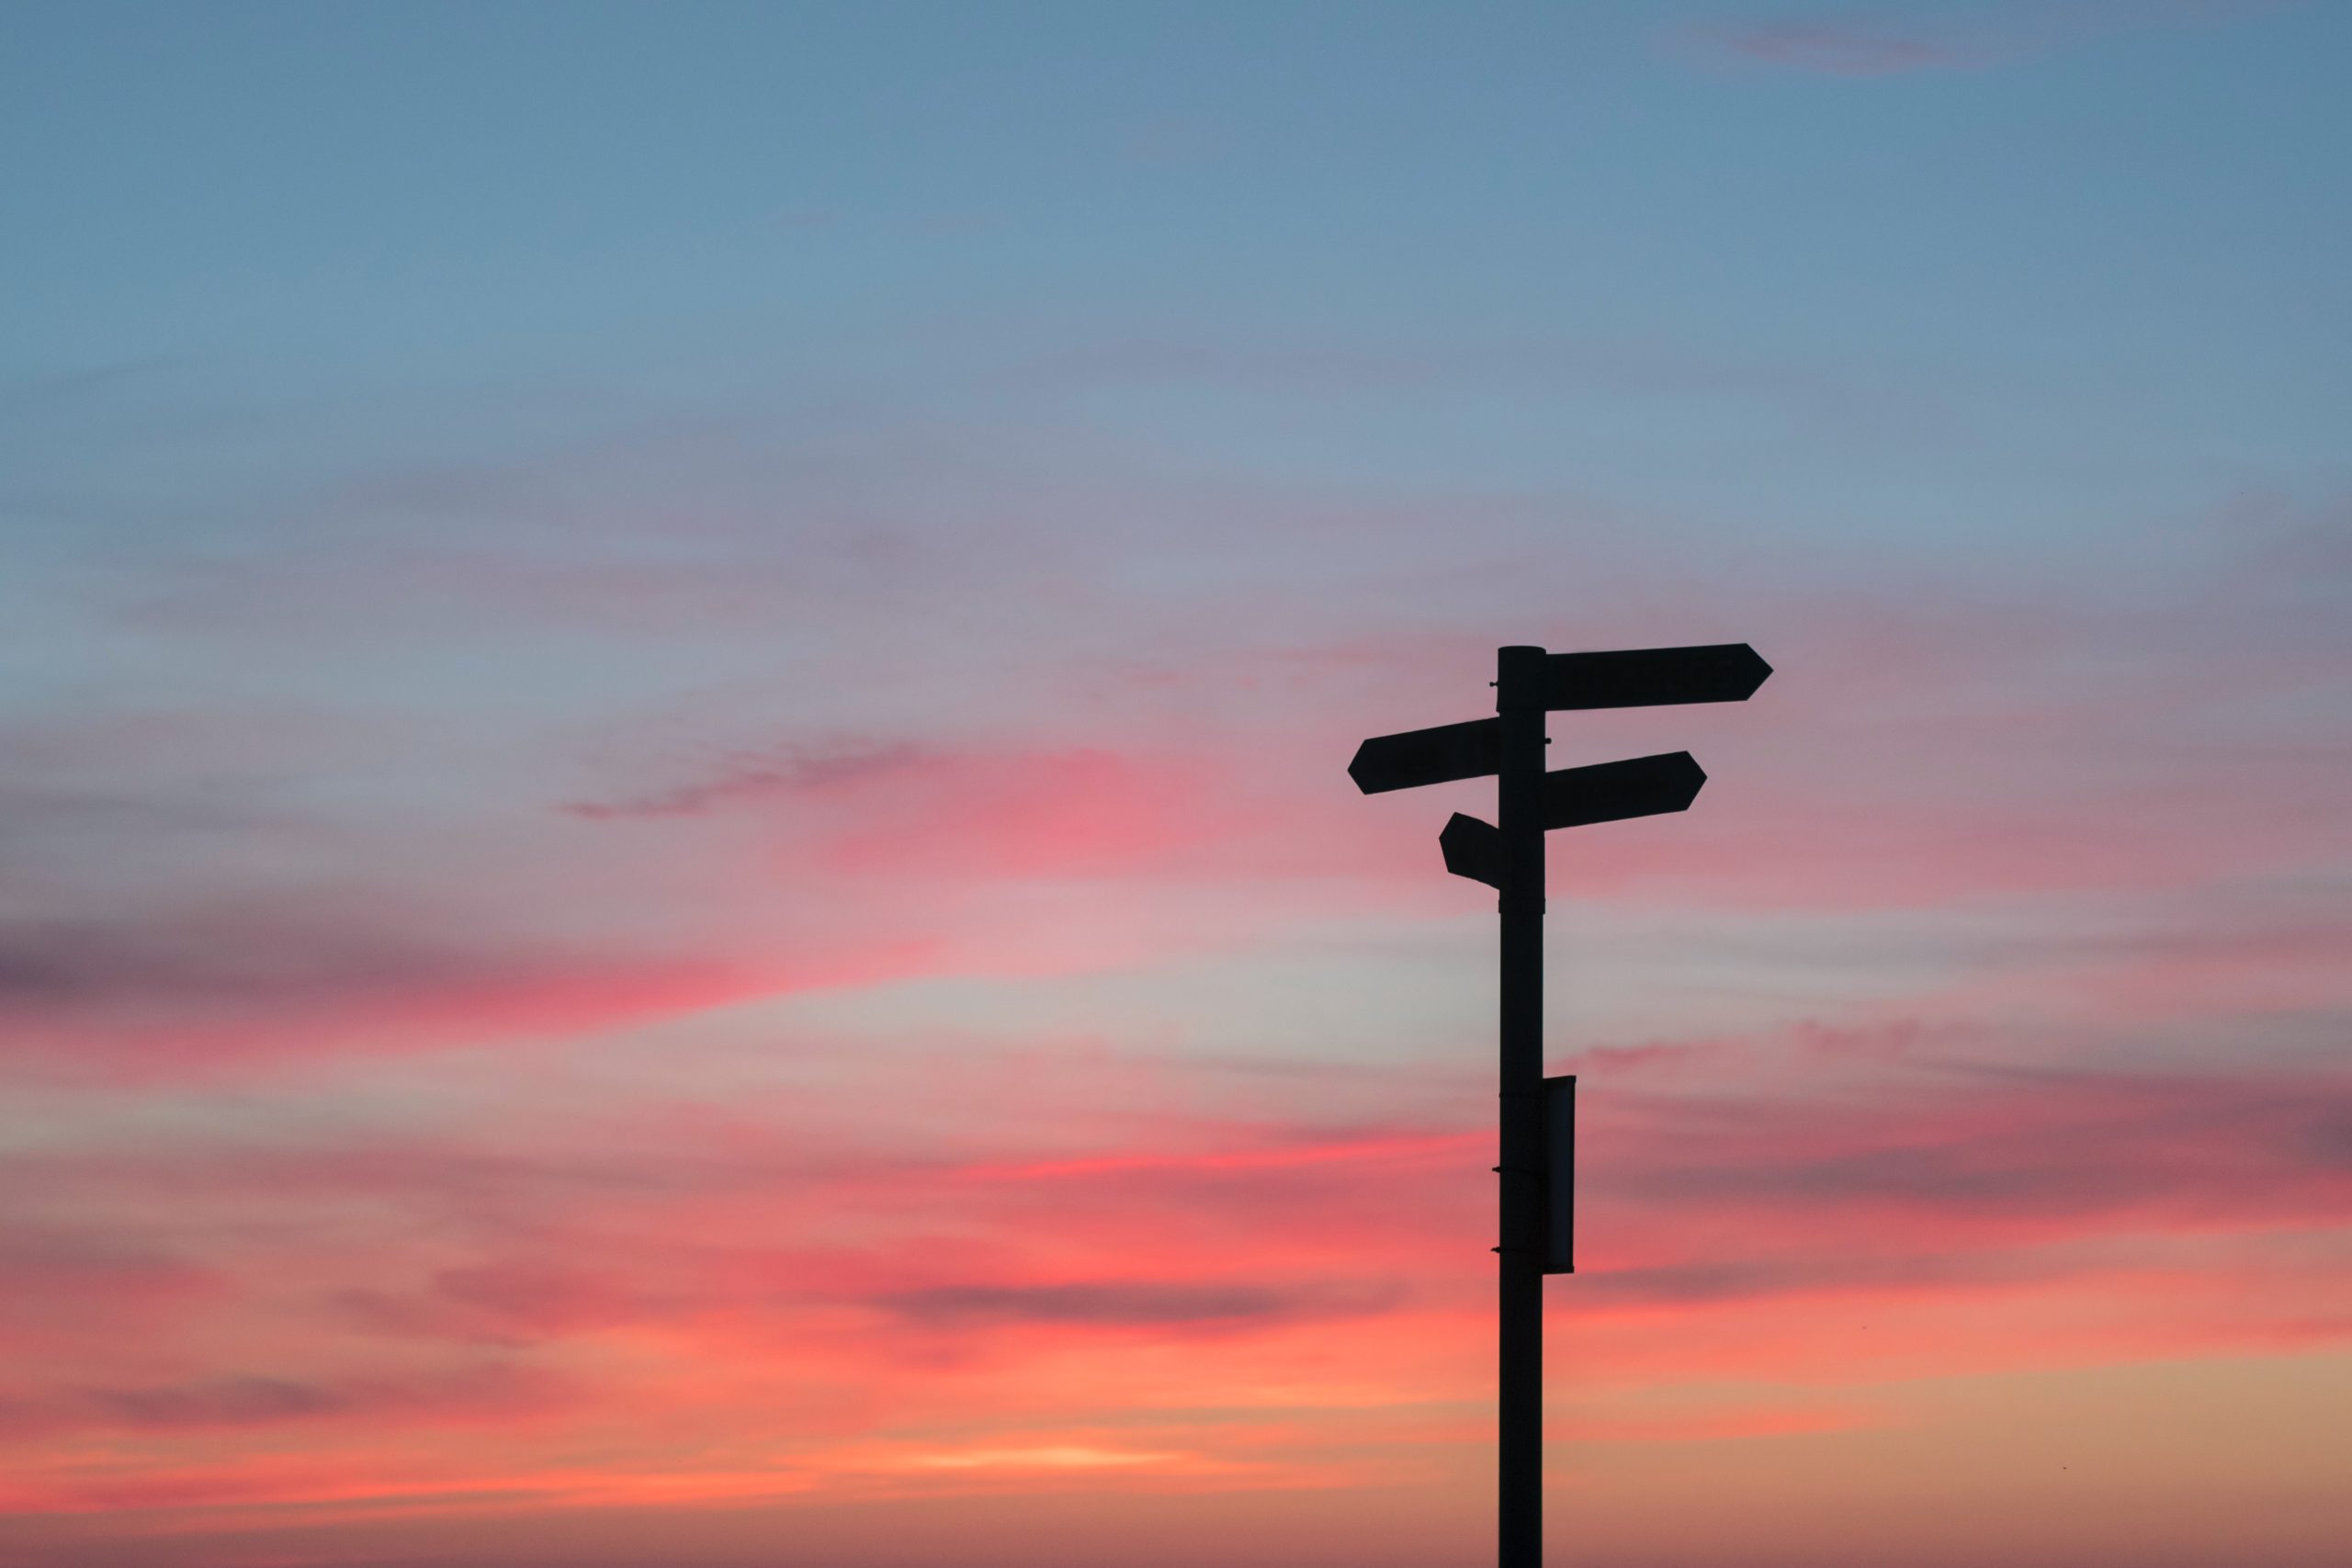 Photo of a signpost against a sunset back drop